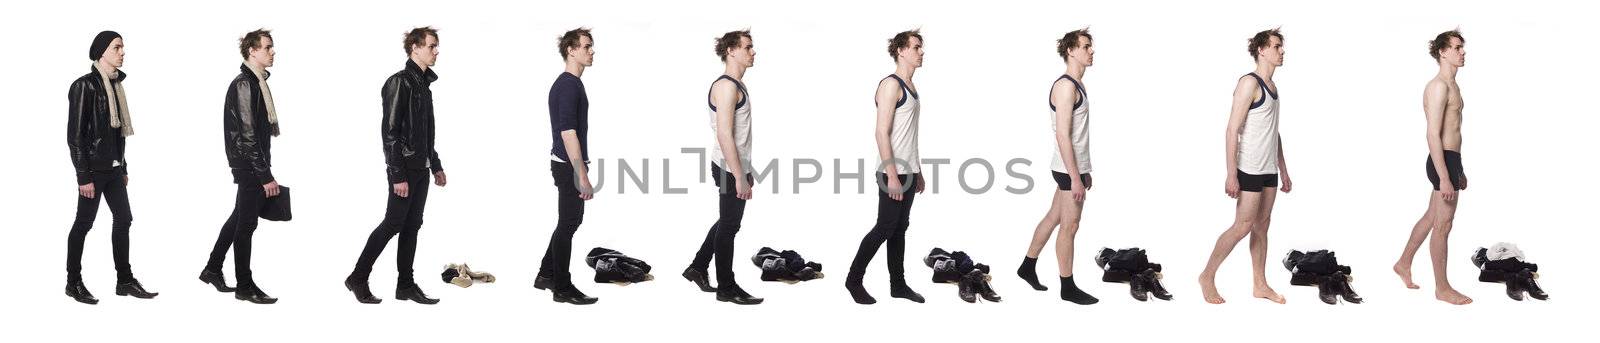 Man taking his clothes of step by step